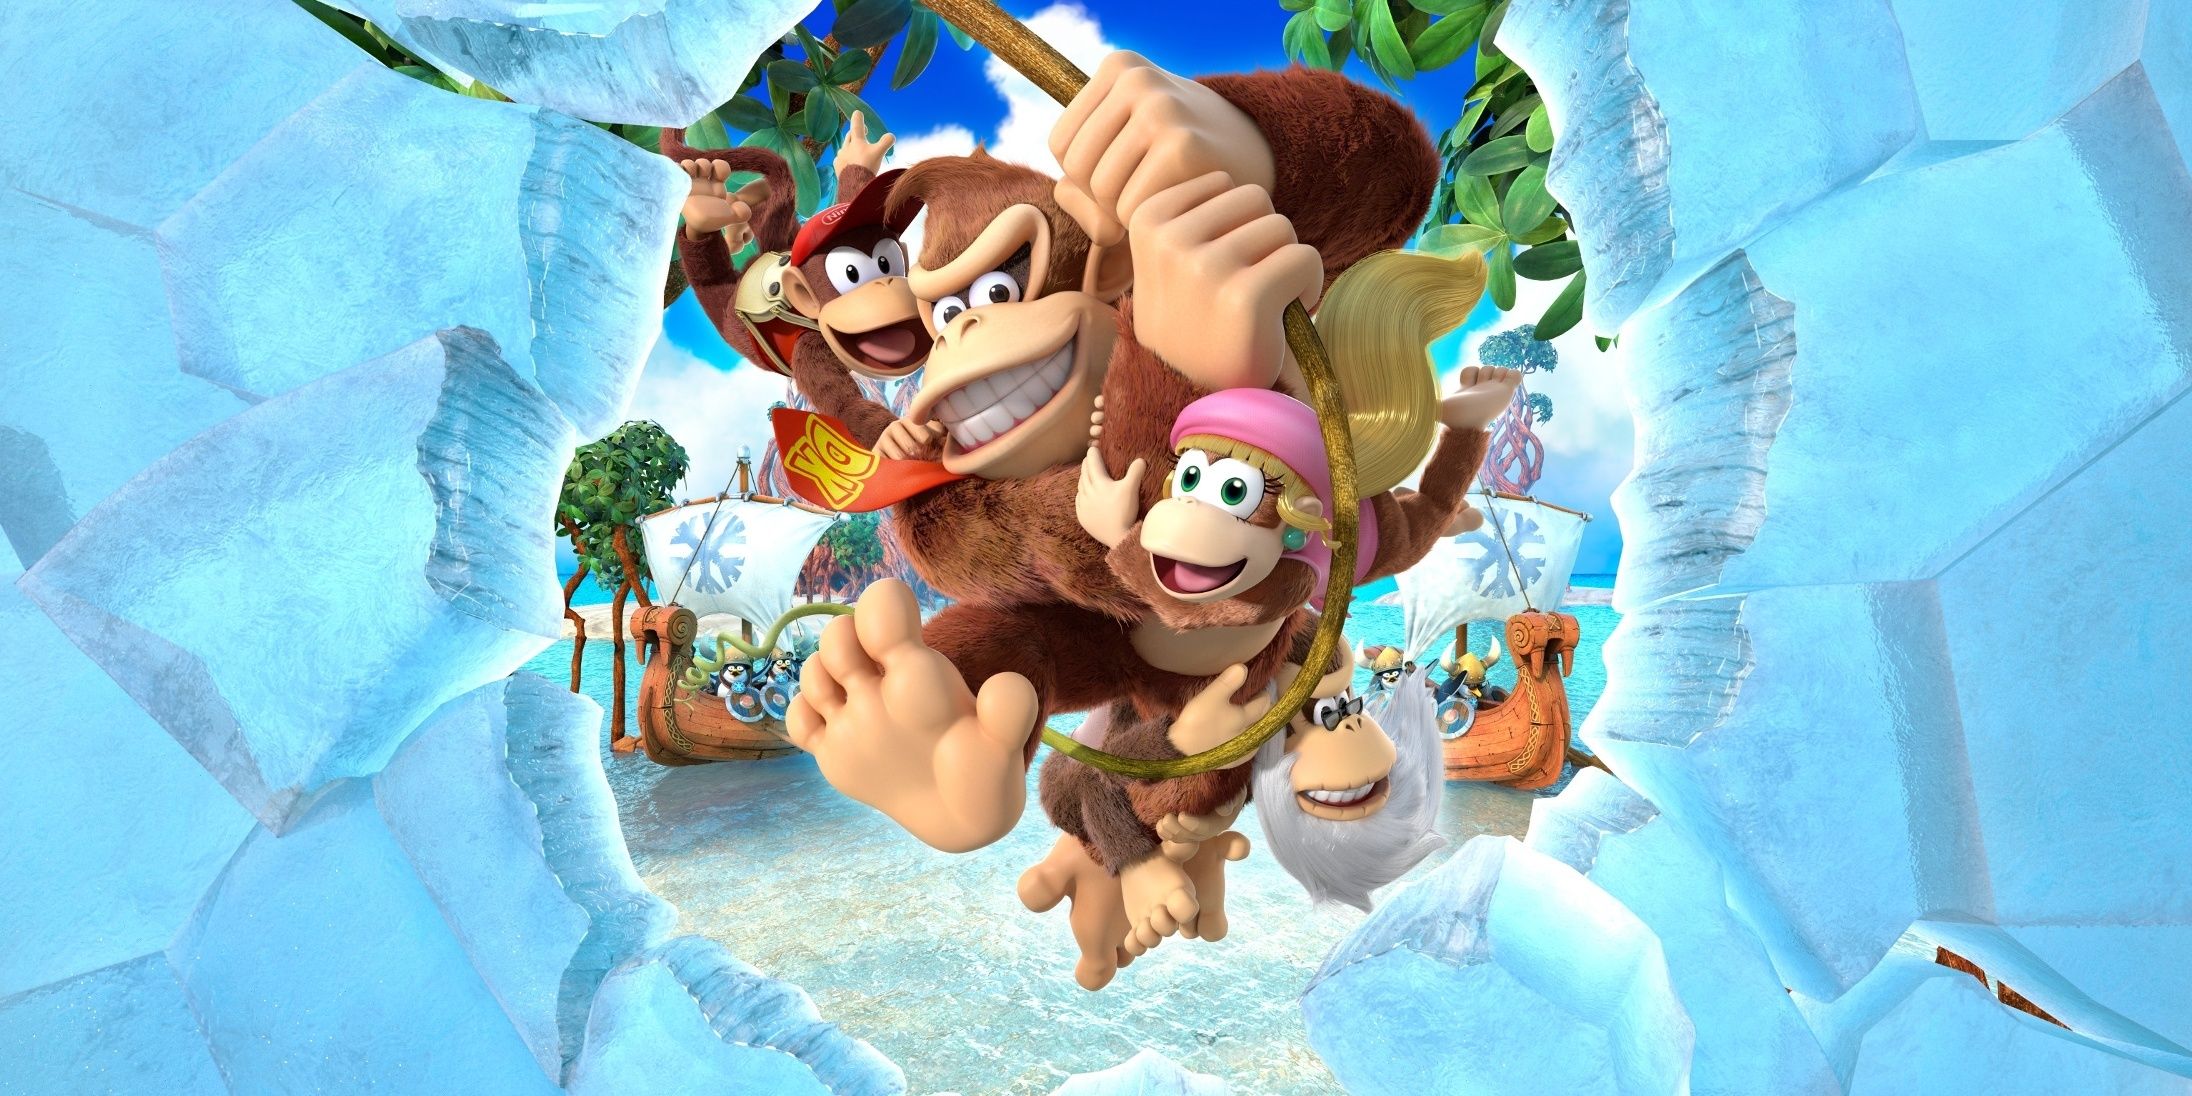 The Tropical Freeze cover art featuring Diddy Kong, Donkey Kong, Dixie Kong, and Cranky Kong